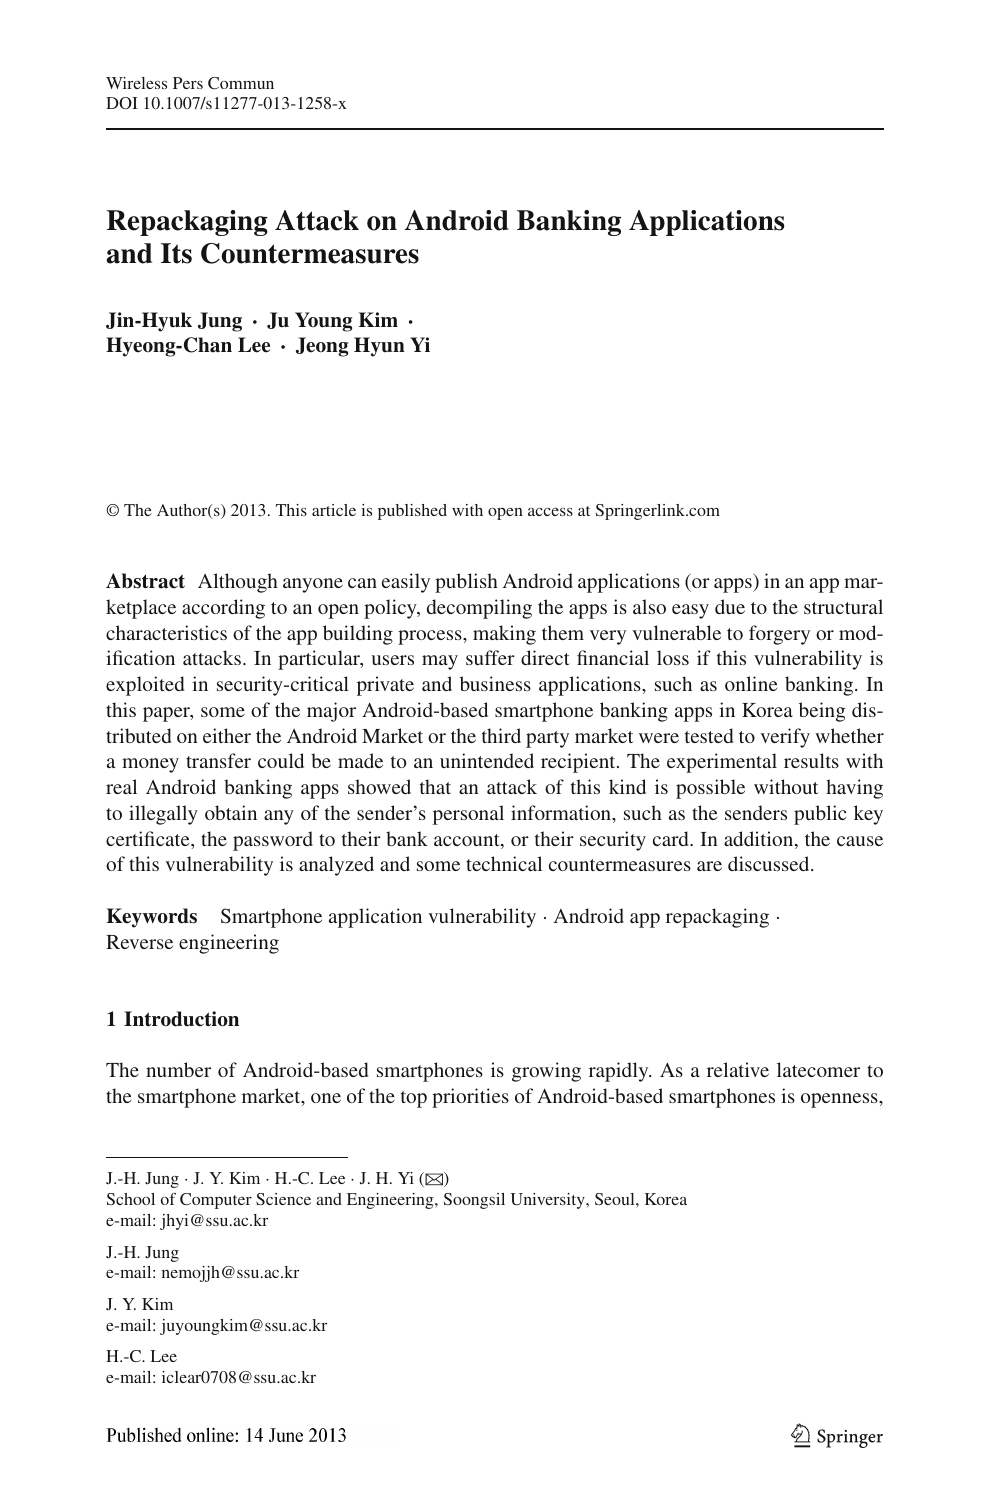 Repackaging Attack On Android Banking Applications And Its Countermeasures Topic Of Research Paper In Computer And Information Sciences Download Scholarly Article Pdf And Read For Free On Cyberleninka Open Science Hub